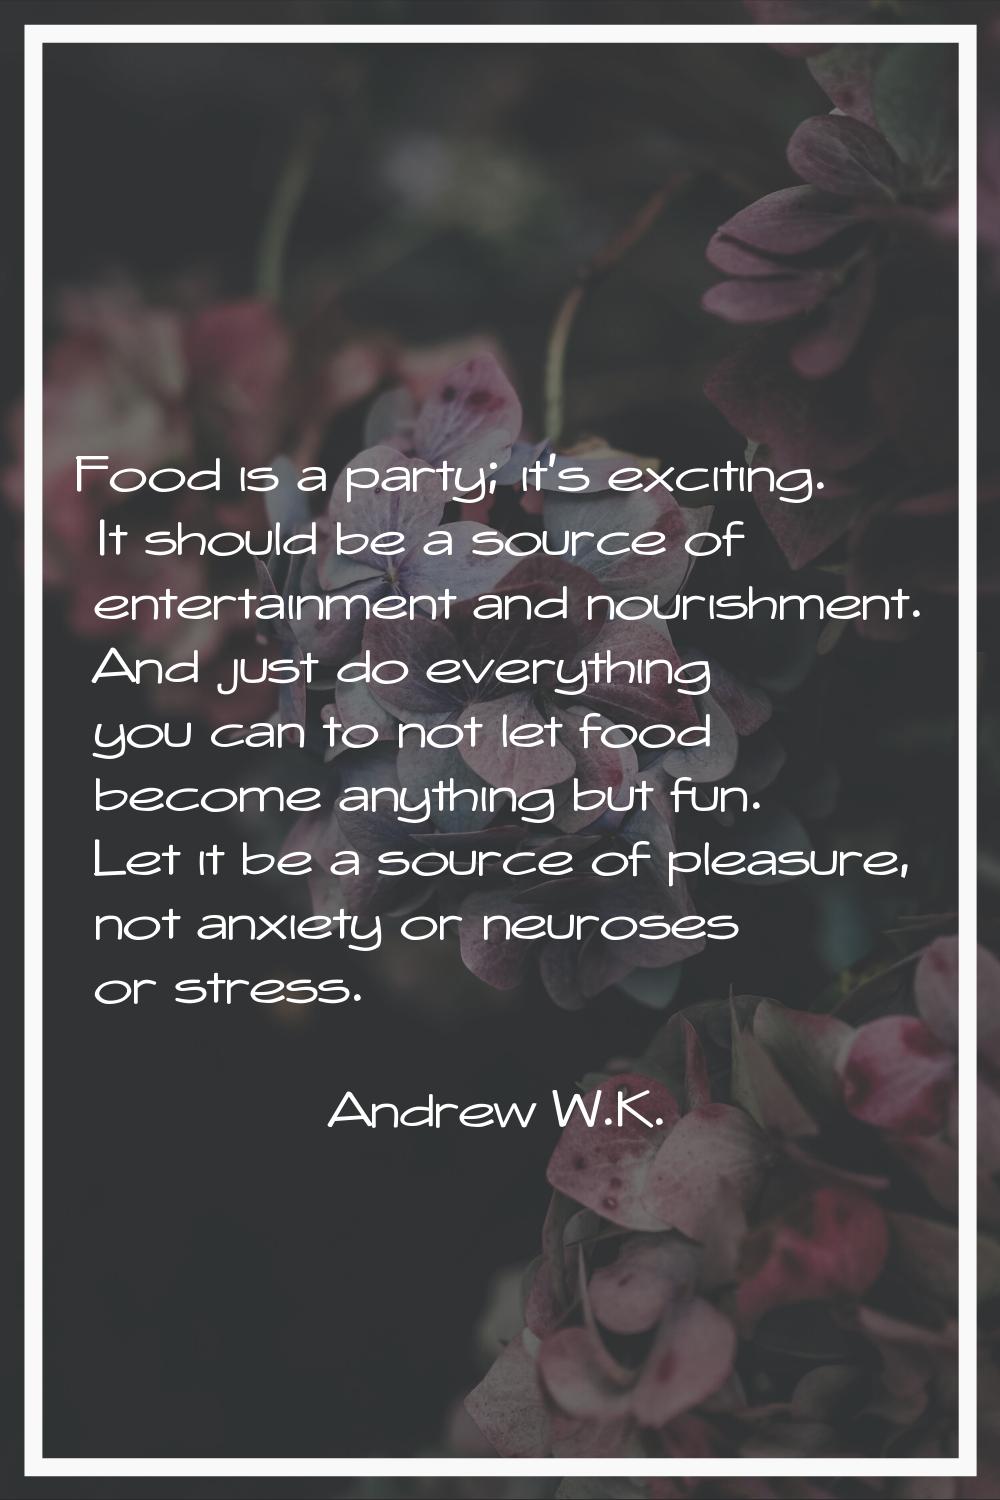 Food is a party; it's exciting. It should be a source of entertainment and nourishment. And just do